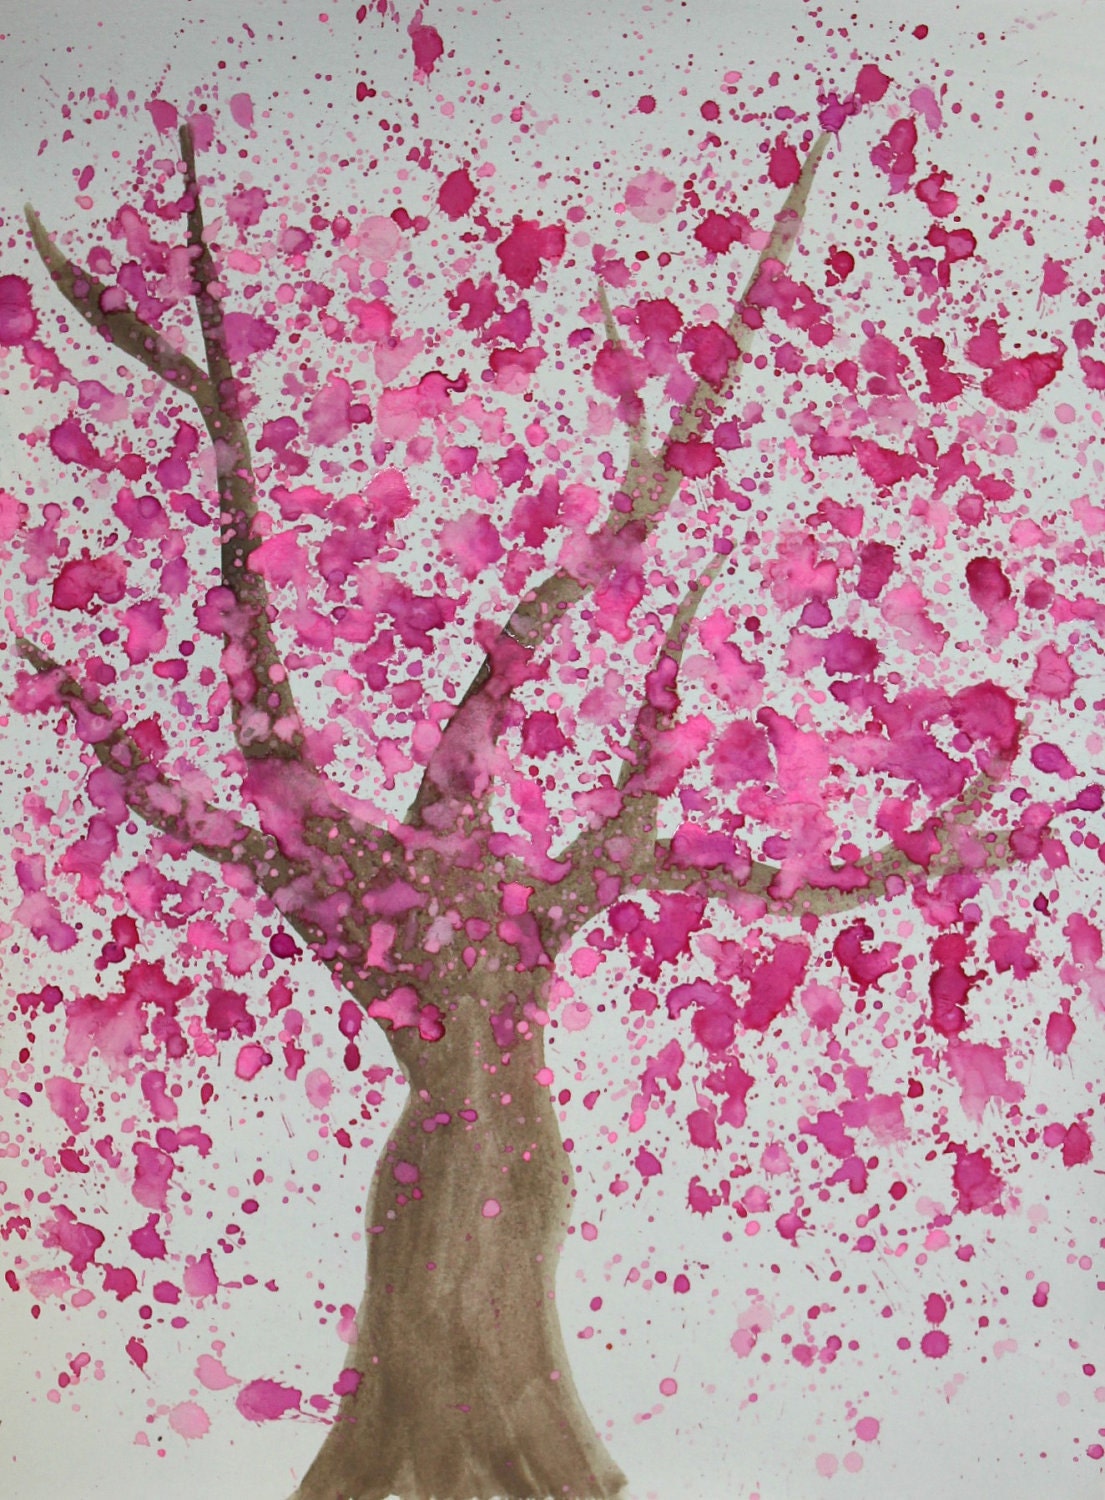 Cherry Blossom Tree Abstract Watercolor 9x12